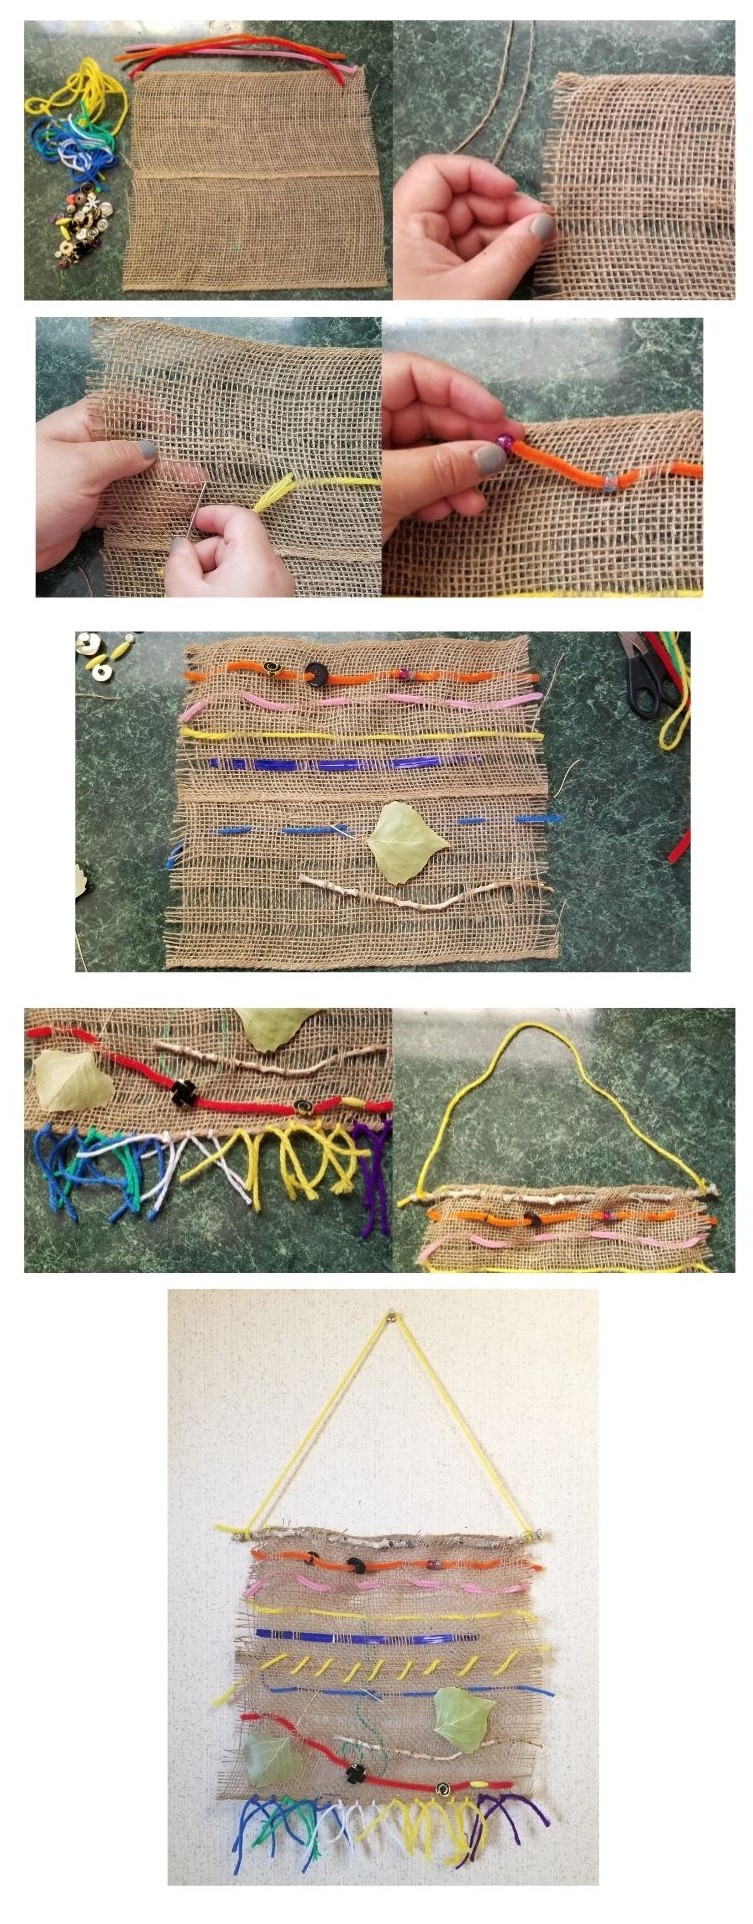 A grouping of eight images that showing the steps of how to weave different materials on a piece of burlap.  